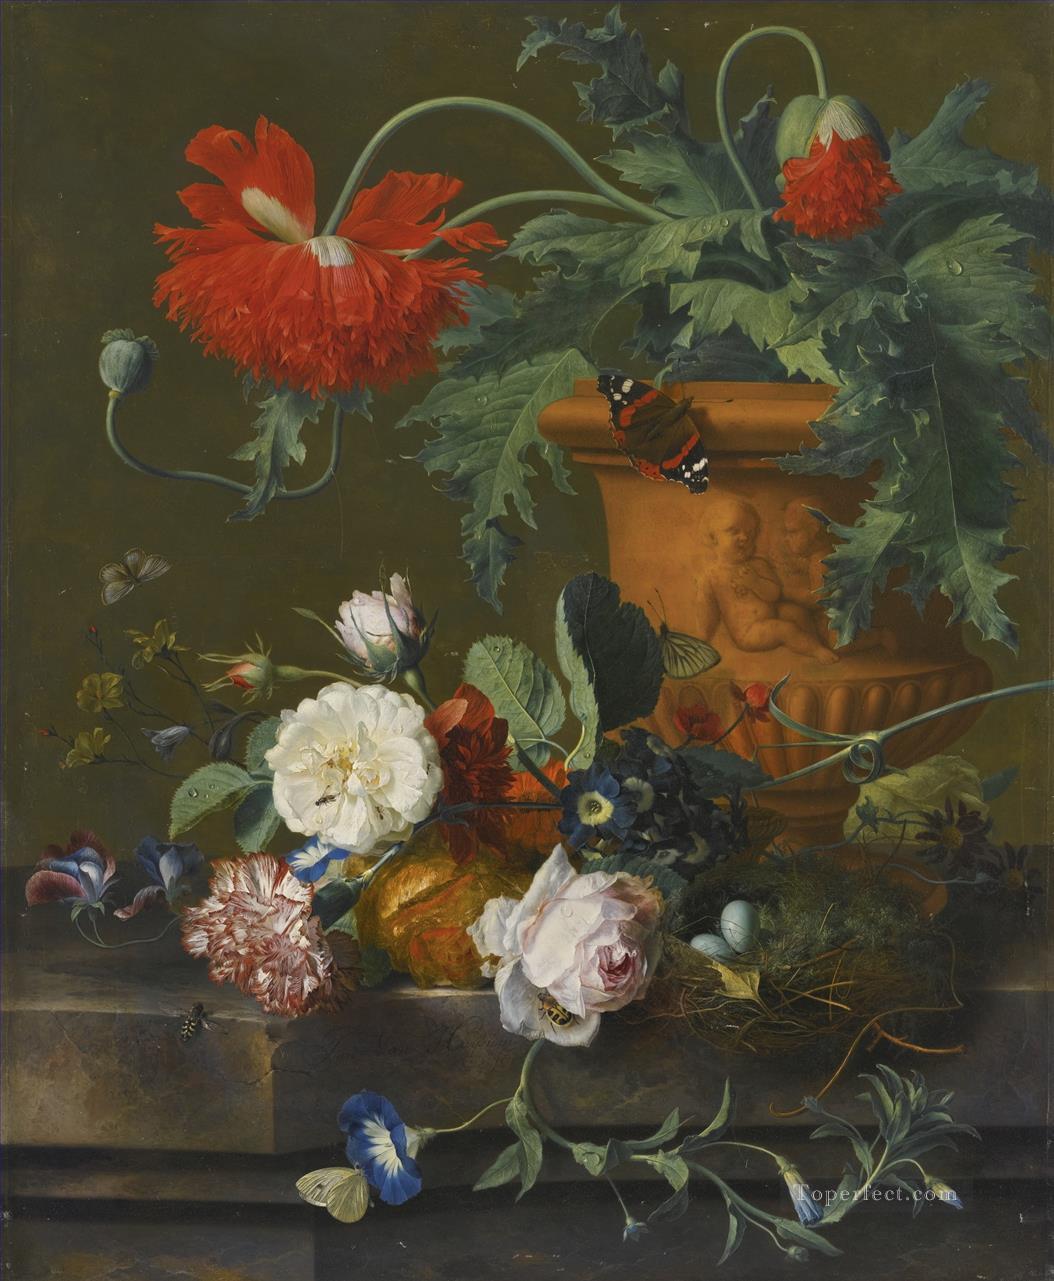 A STILL LIFE OF POPPIES IN A TERRACOTTA VASE ROSES A CARNATION AND OTHER FLOWERS Jan van Huysum Oil Paintings